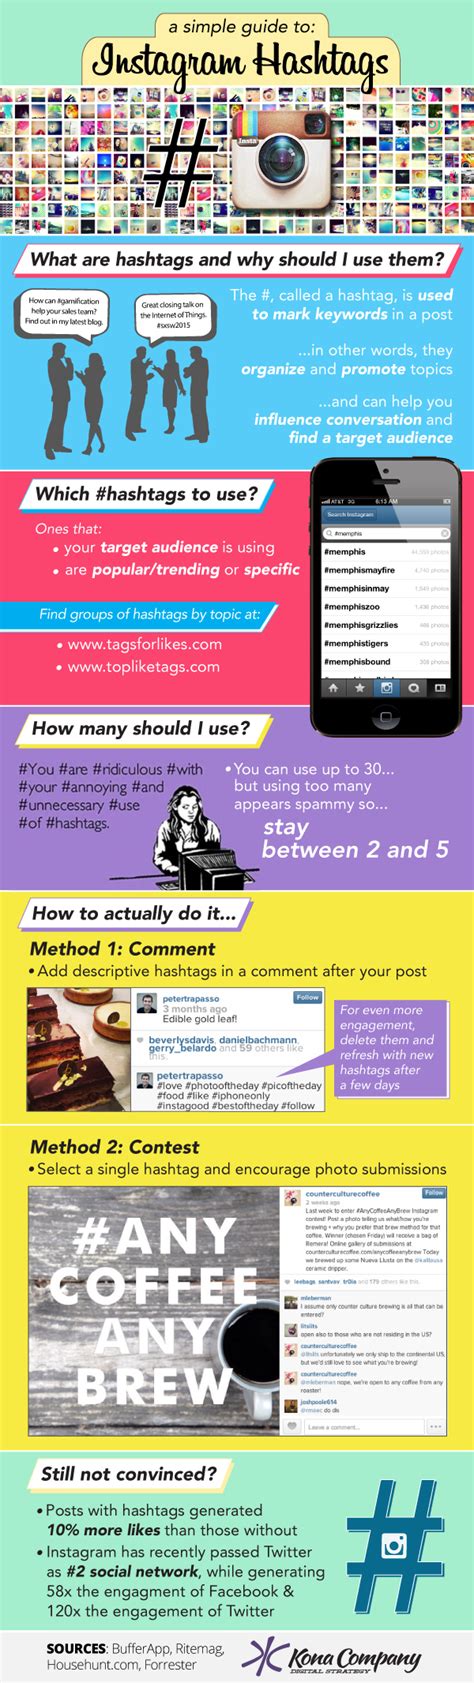 A Simple Guide To Instagram Hashtags Infographic Kona